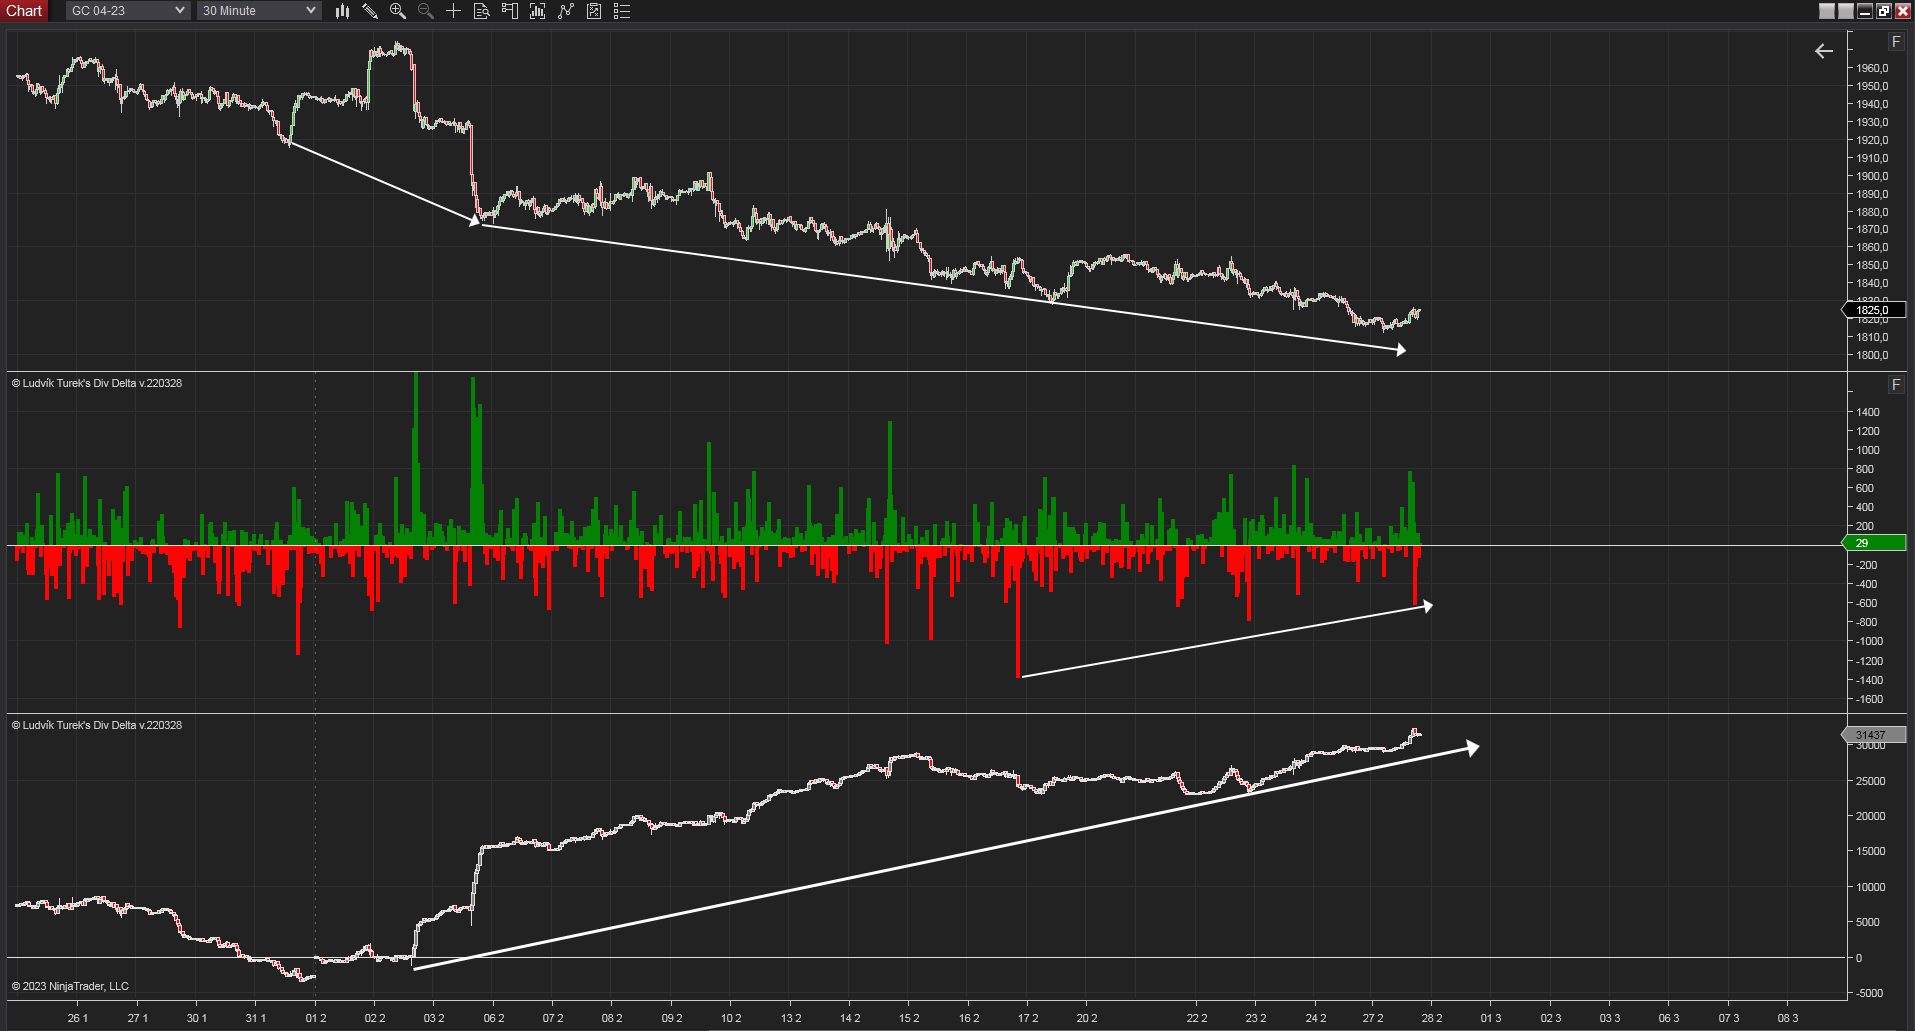 30 minutes chart of GC (Gold Futures). Divergence delta between price and volume in February. Source: Author's analysis